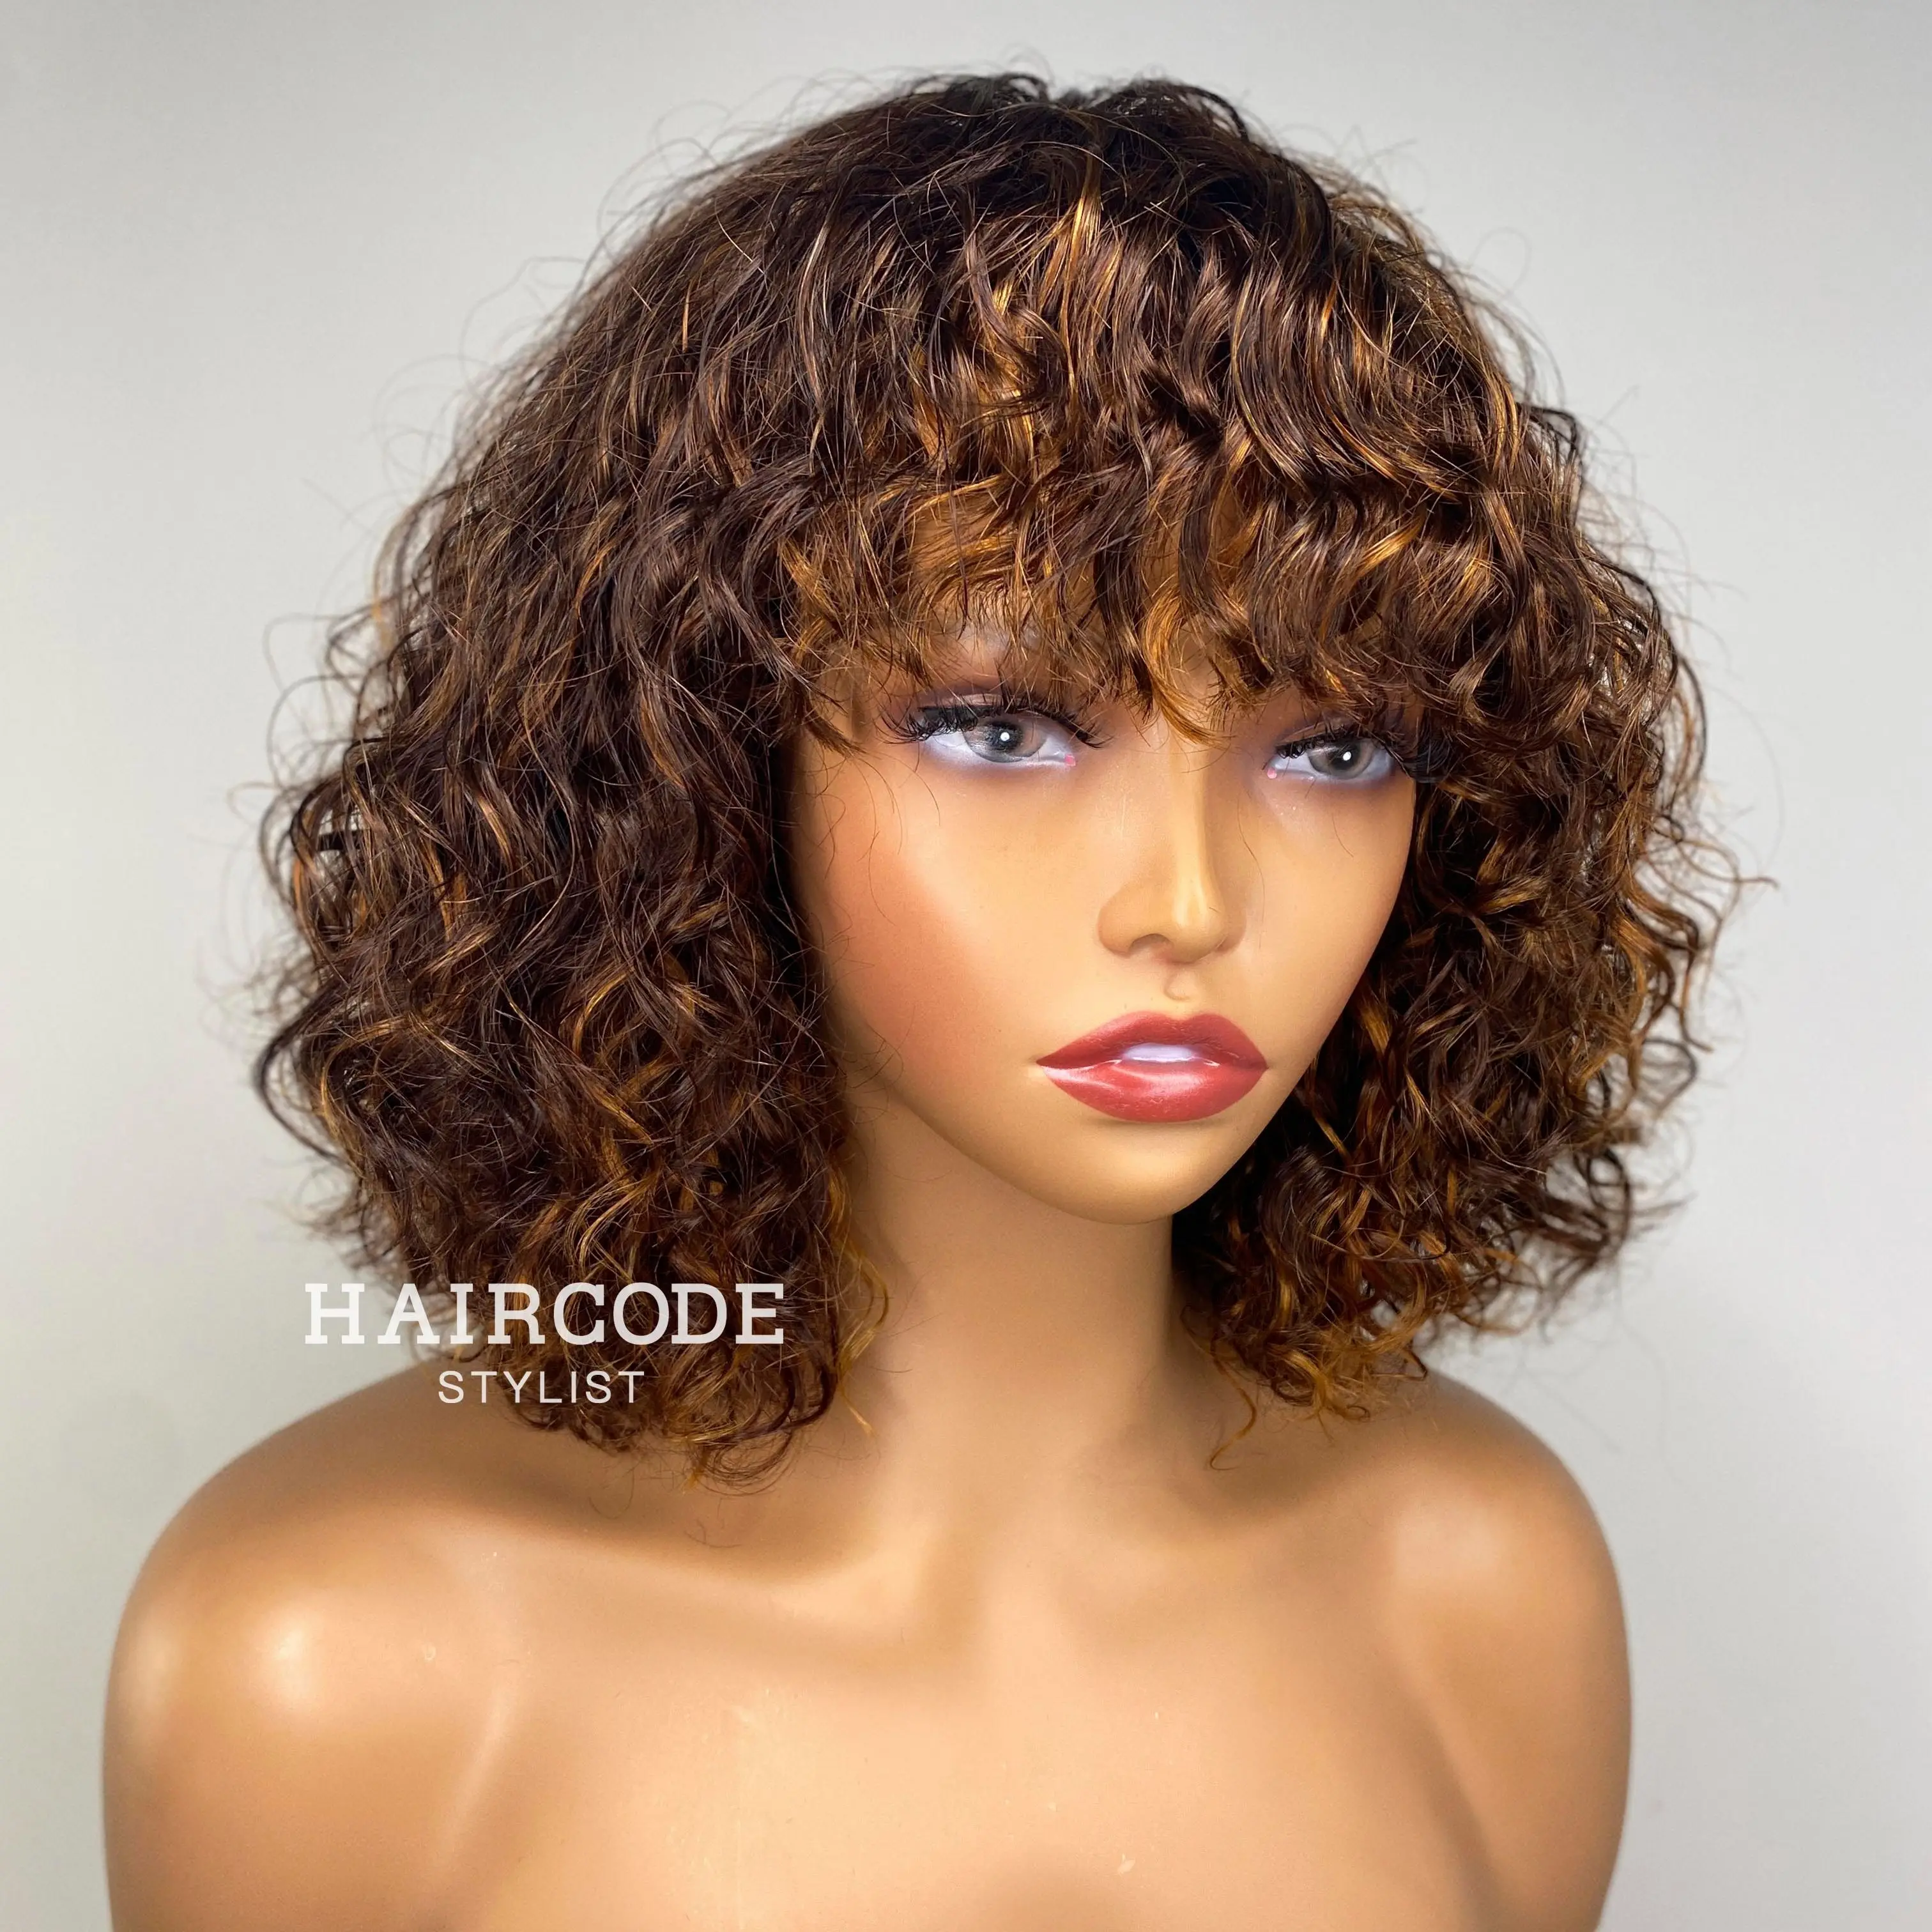 

Highlight Blonde Water Wave Bob Human Hair Wigs with Bangs Short Curly Fringe Wigs for Women Full Machine Made Remy Hair Gorgius